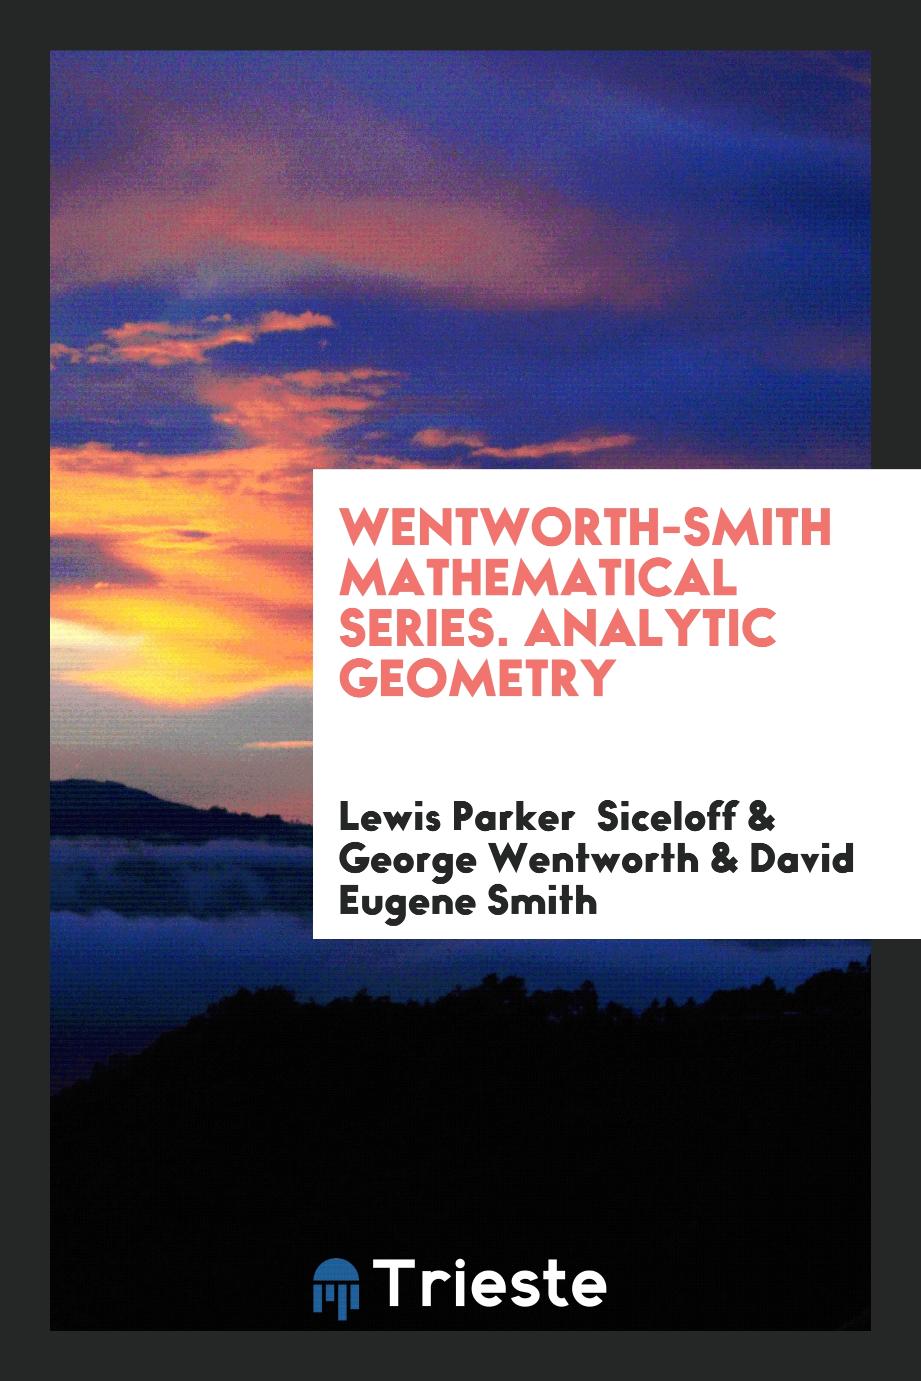 Wentworth-Smith Mathematical Series. Analytic Geometry